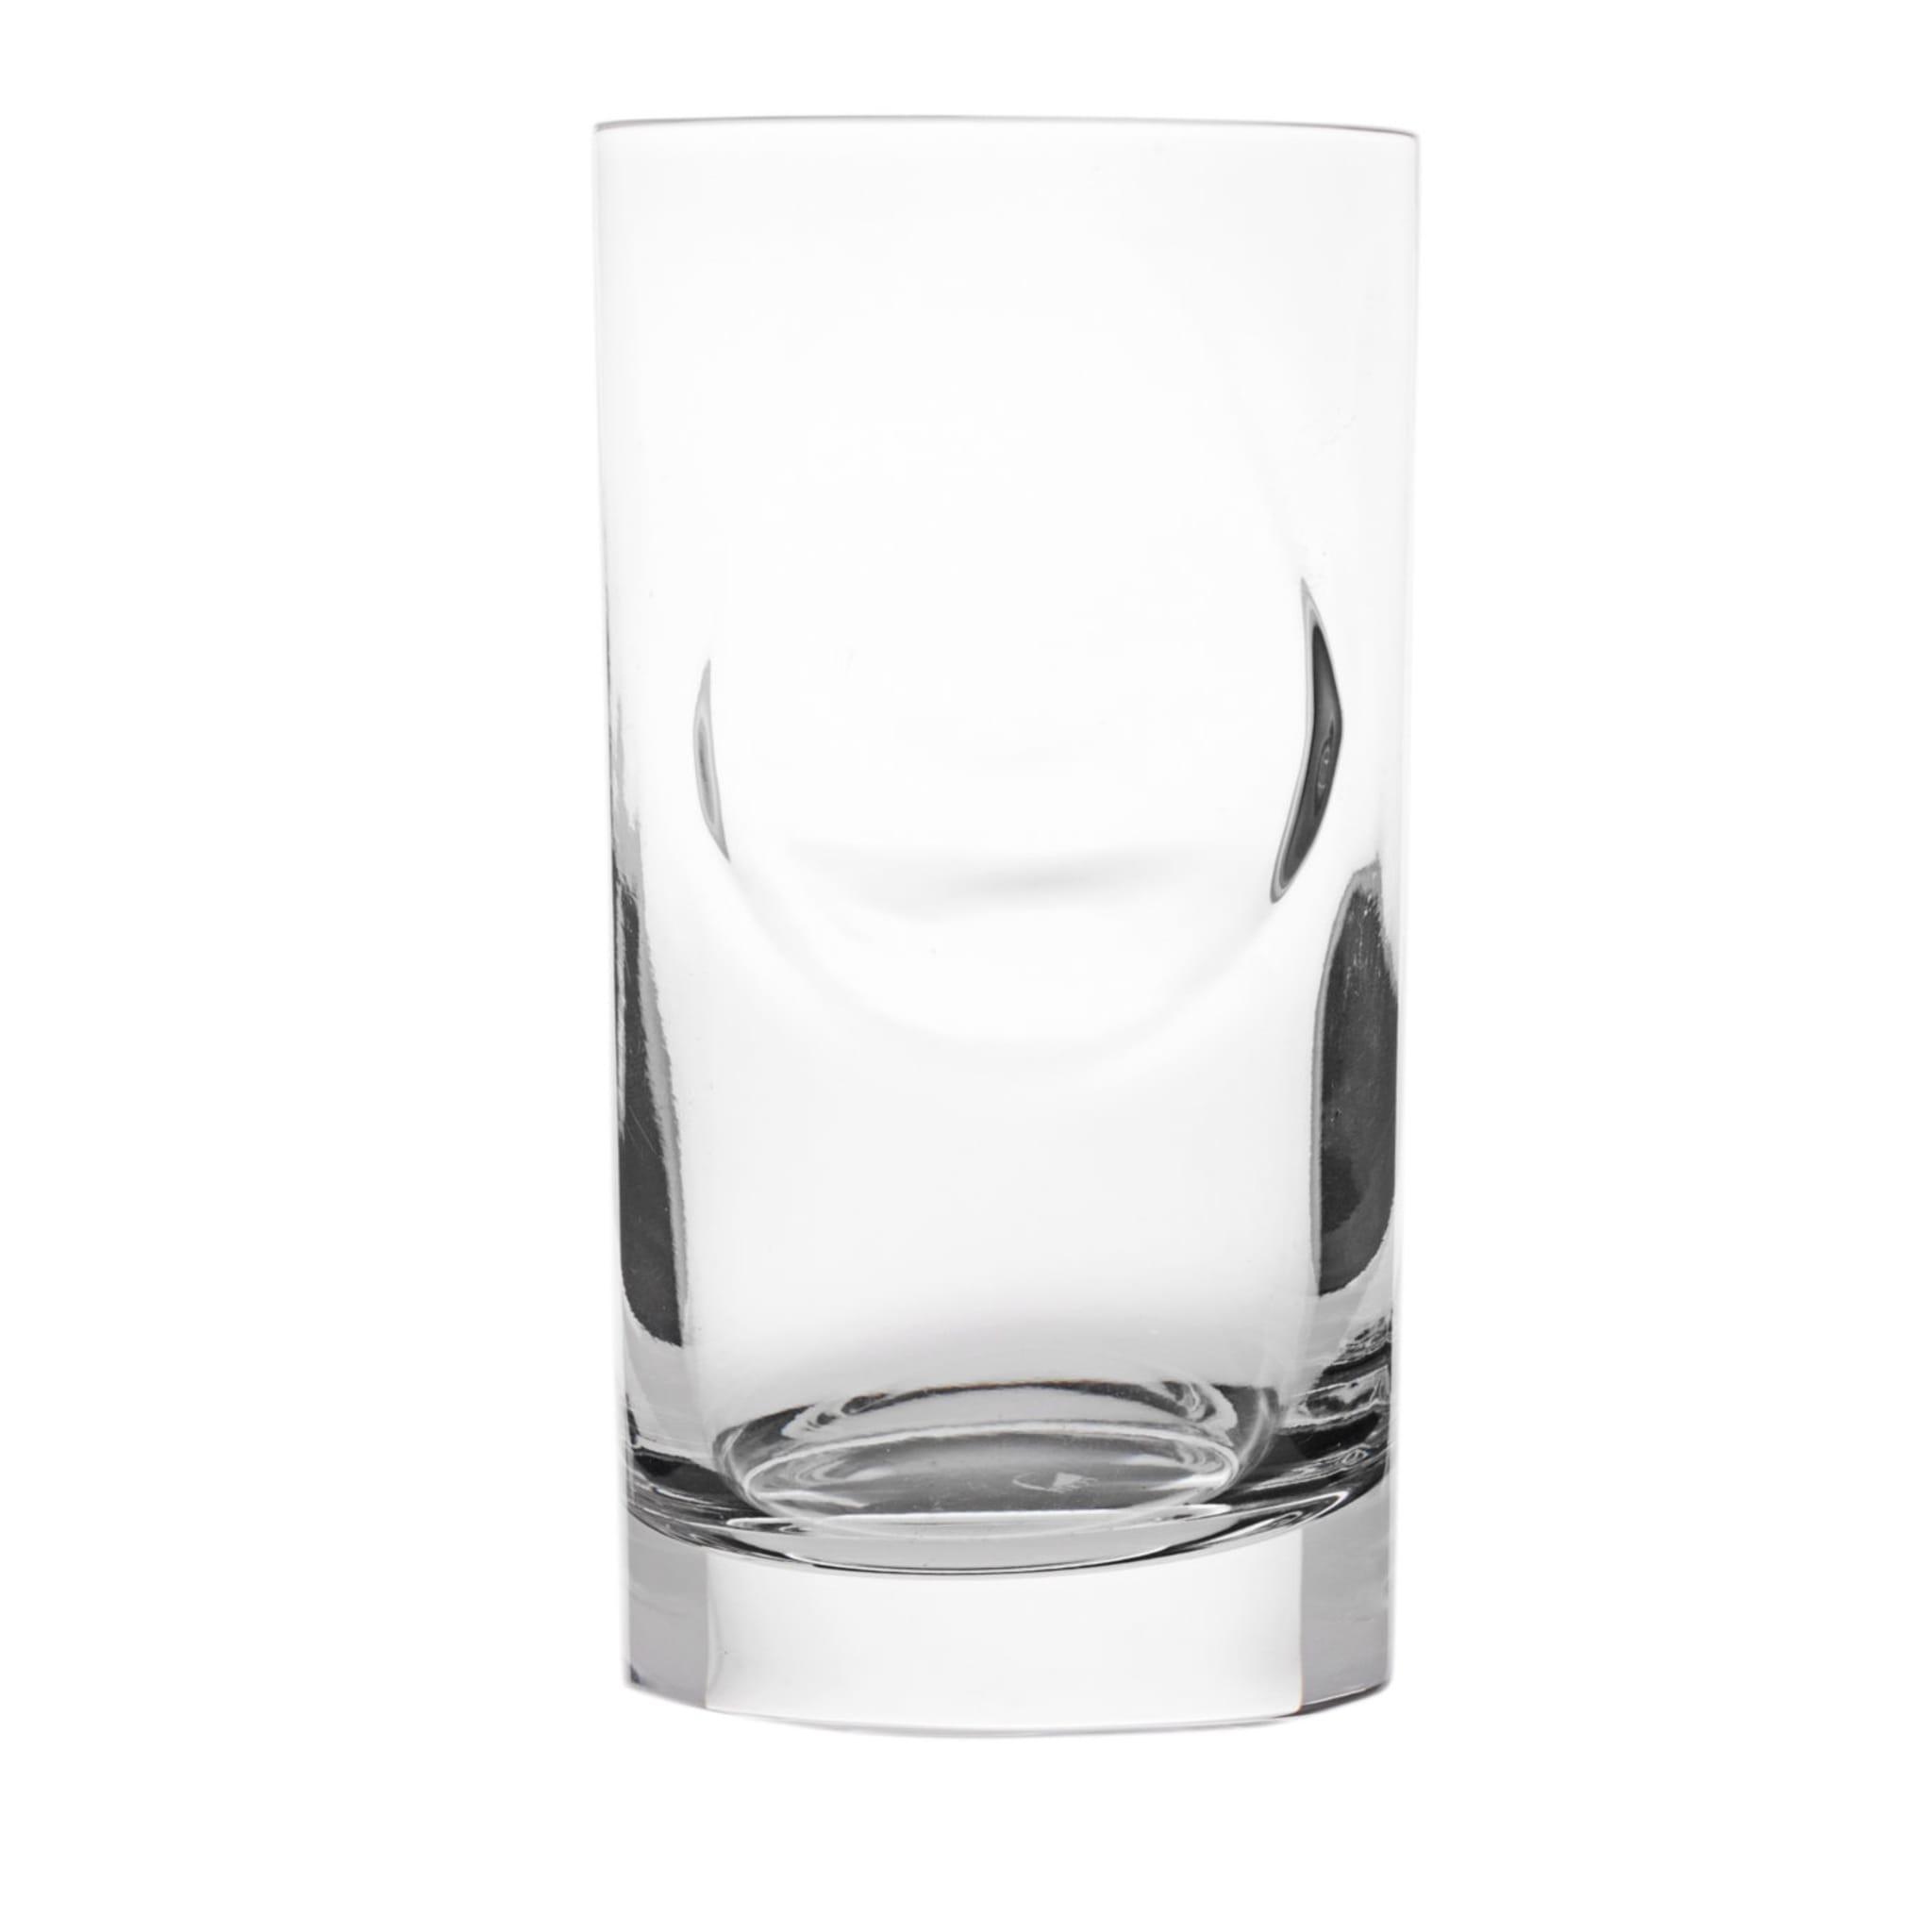 Set of 6 Ice Stopper Crystal Whisky Glasses by Angelo Mangiarotti - Alternative view 1